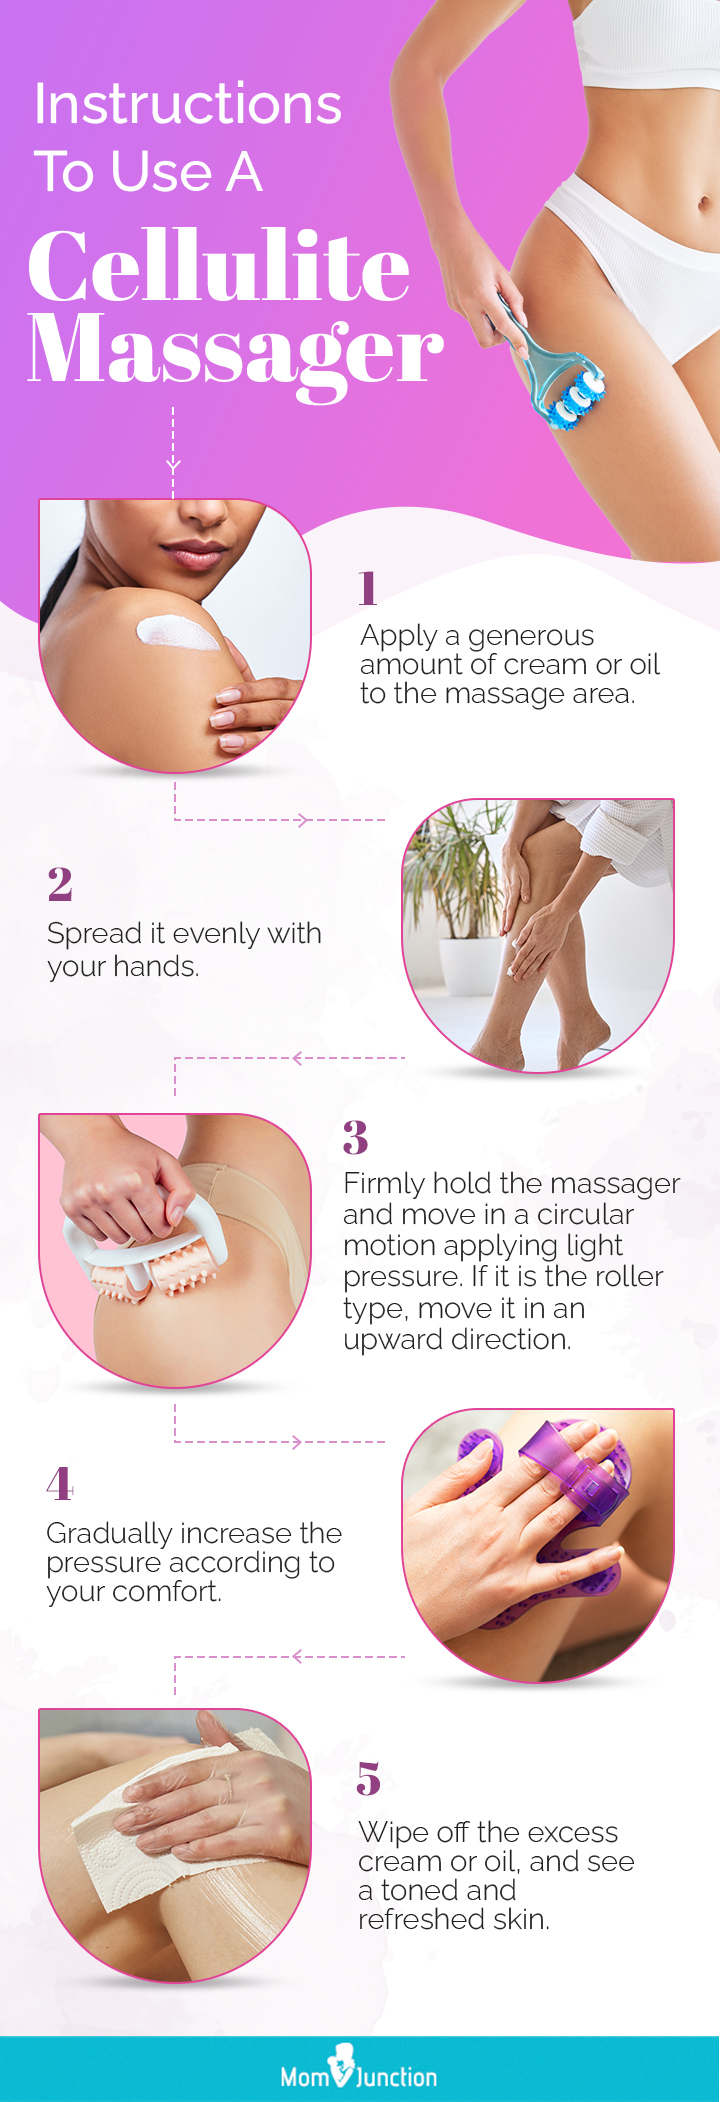 How To Use A Cellulite Massager